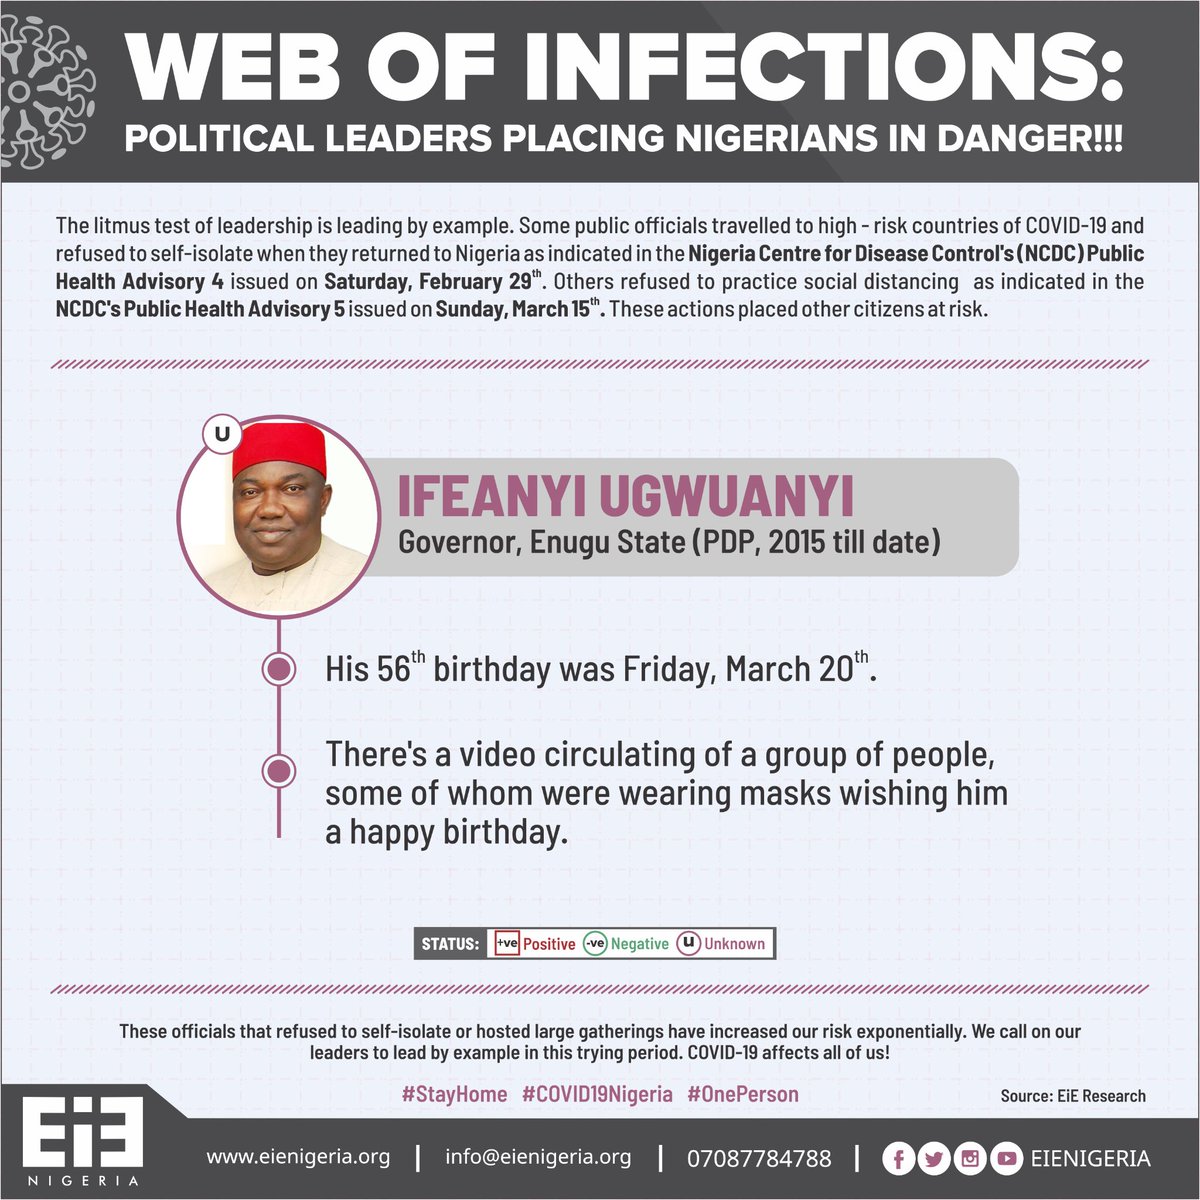  #WebOfInfections - Governor Ifeanyi Ugwuanyi - Celebrated his birthday on March 20th in a stacked-up room. - Some of the persons in the rooms were seen with face masks but with very little or no space between them. #OnePerson  #COVID19Nigeria